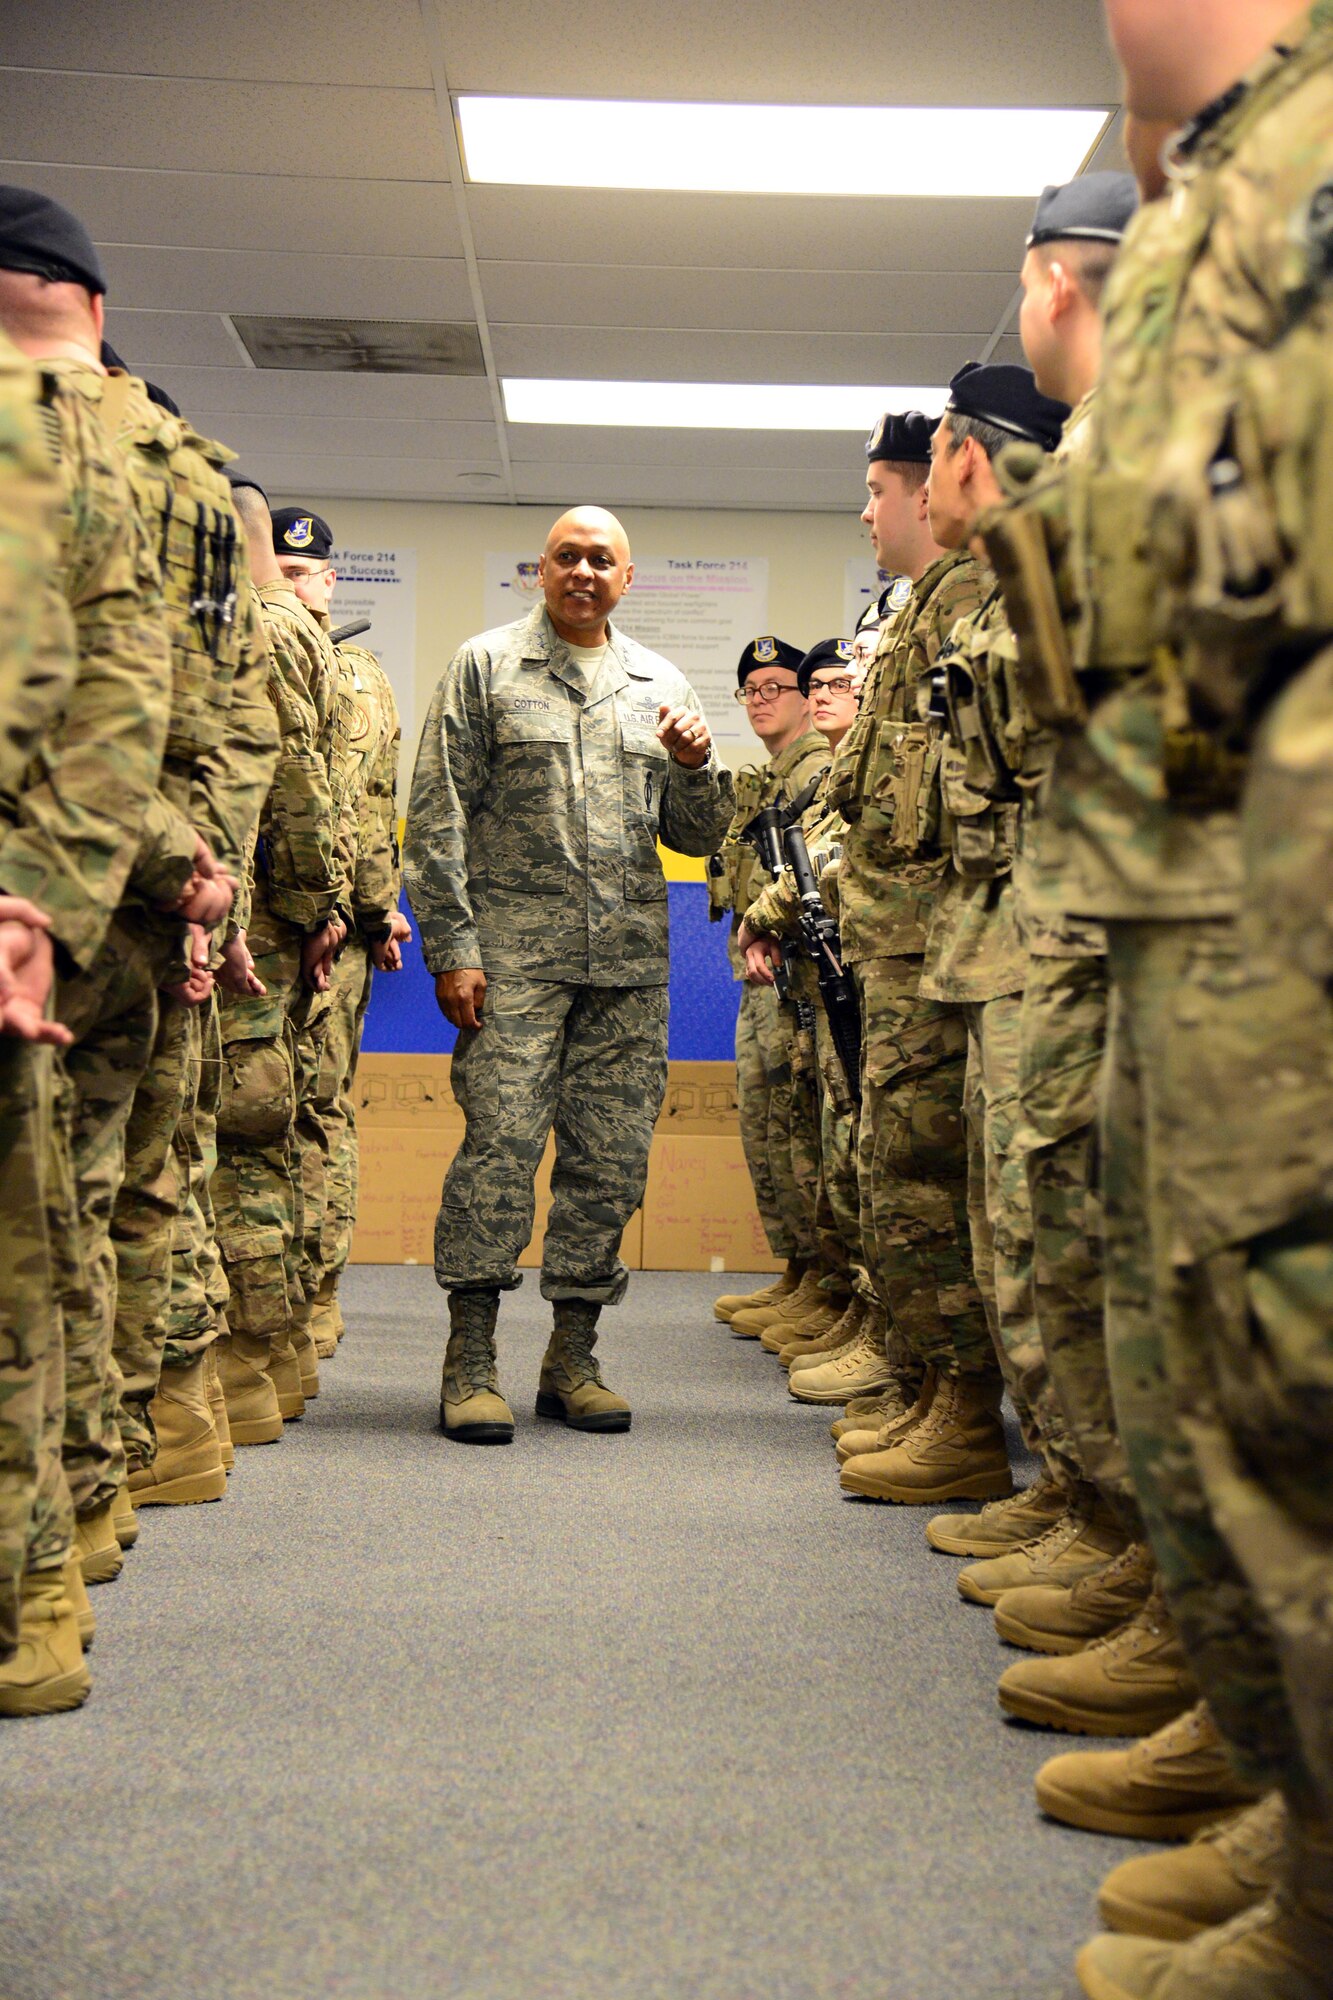 Maj. Gen. Anthony Cotton, 20th Air Force commander, visits Airmen from the 341st Missile Security Forces Squadron Dec. 7, 2015, at Malmstrom Air Force Base, Mont. Cotton introduced himself to the Airmen during guardmount and took the opportunity to discuss his views on the nation’s defense. Cotton is a former 341st Missile Wing commander, and now leads the nation's land based intercontinental ballistic missile force. (U.S. Air Force photo/Airman 1st Class Magen M. Reeves)